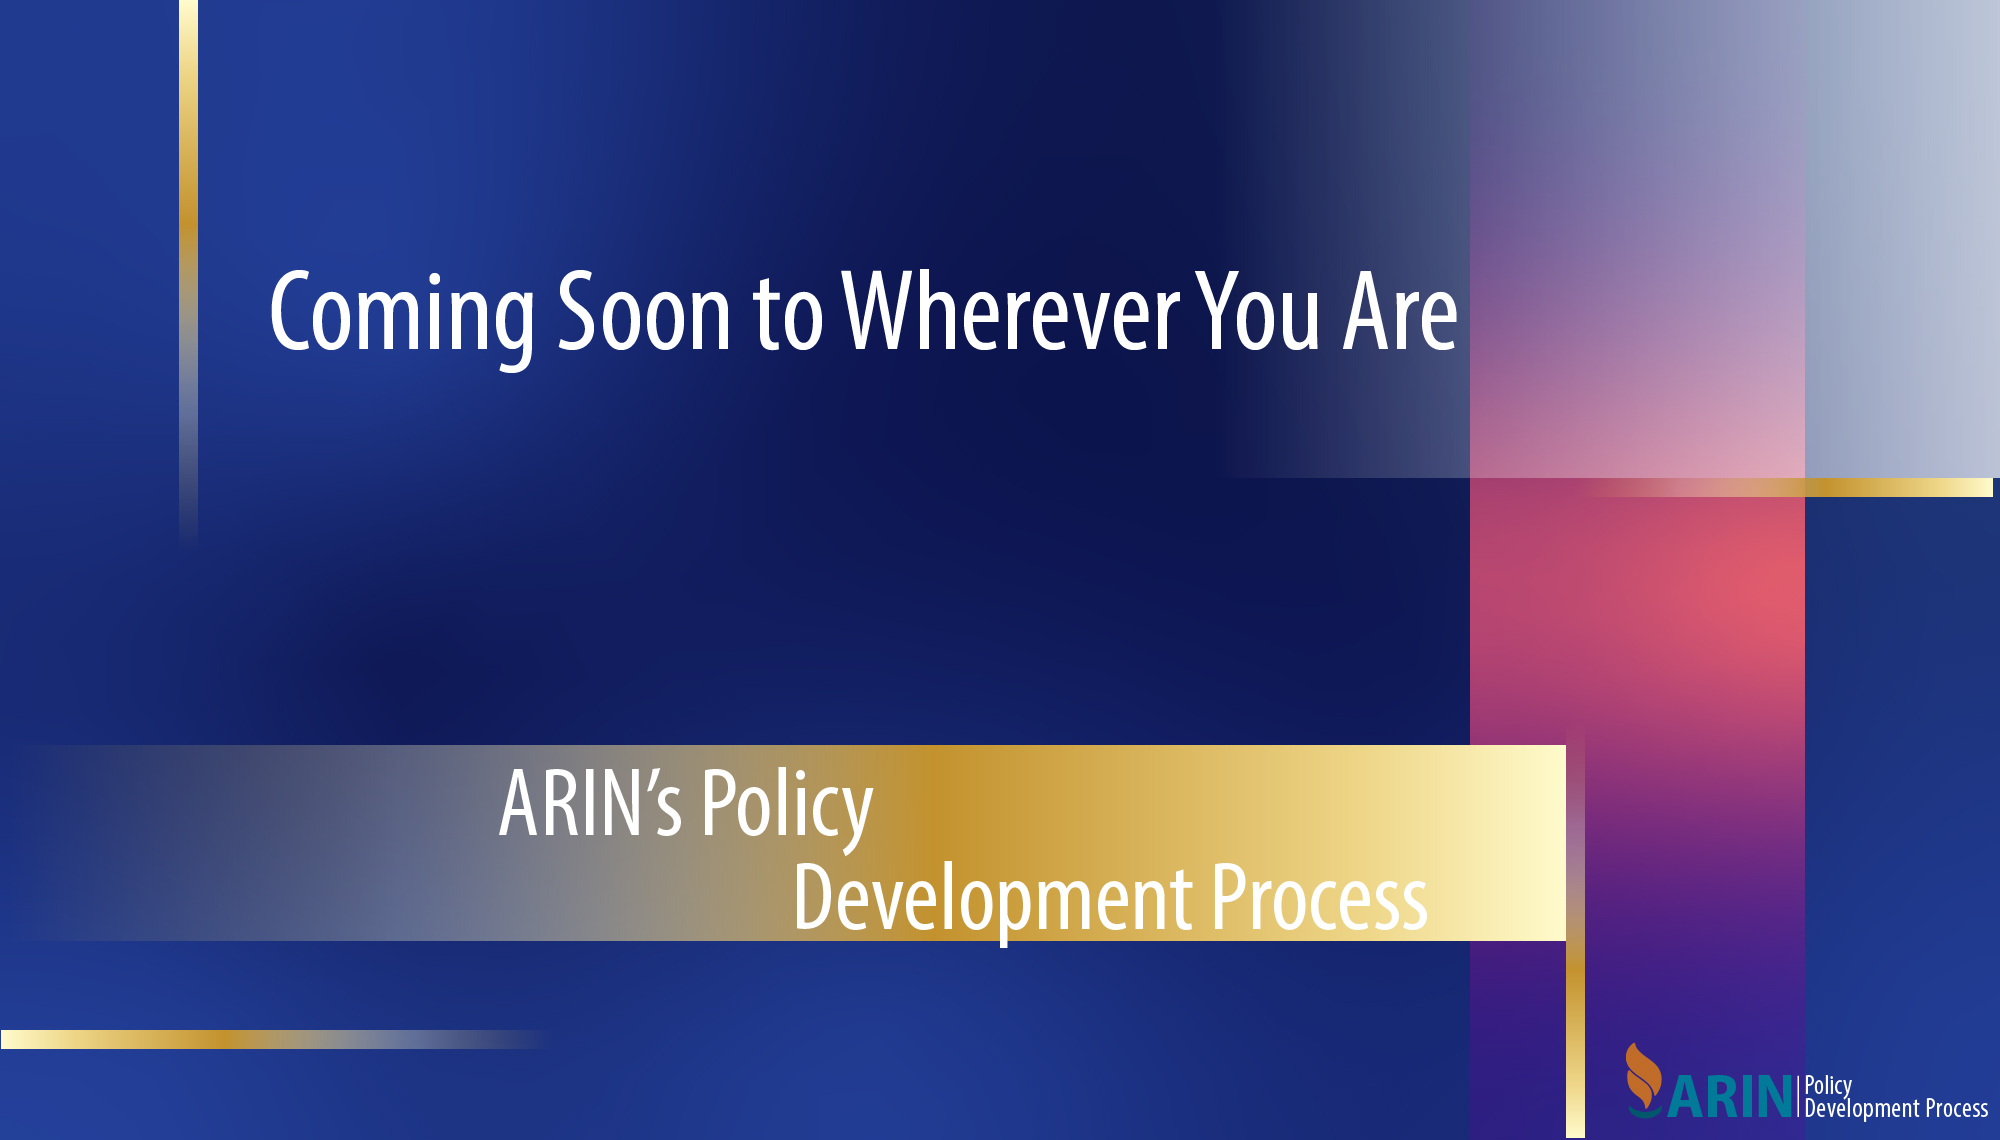 ARIN’s Policy Development Process - Coming Soon to Wherever You Are